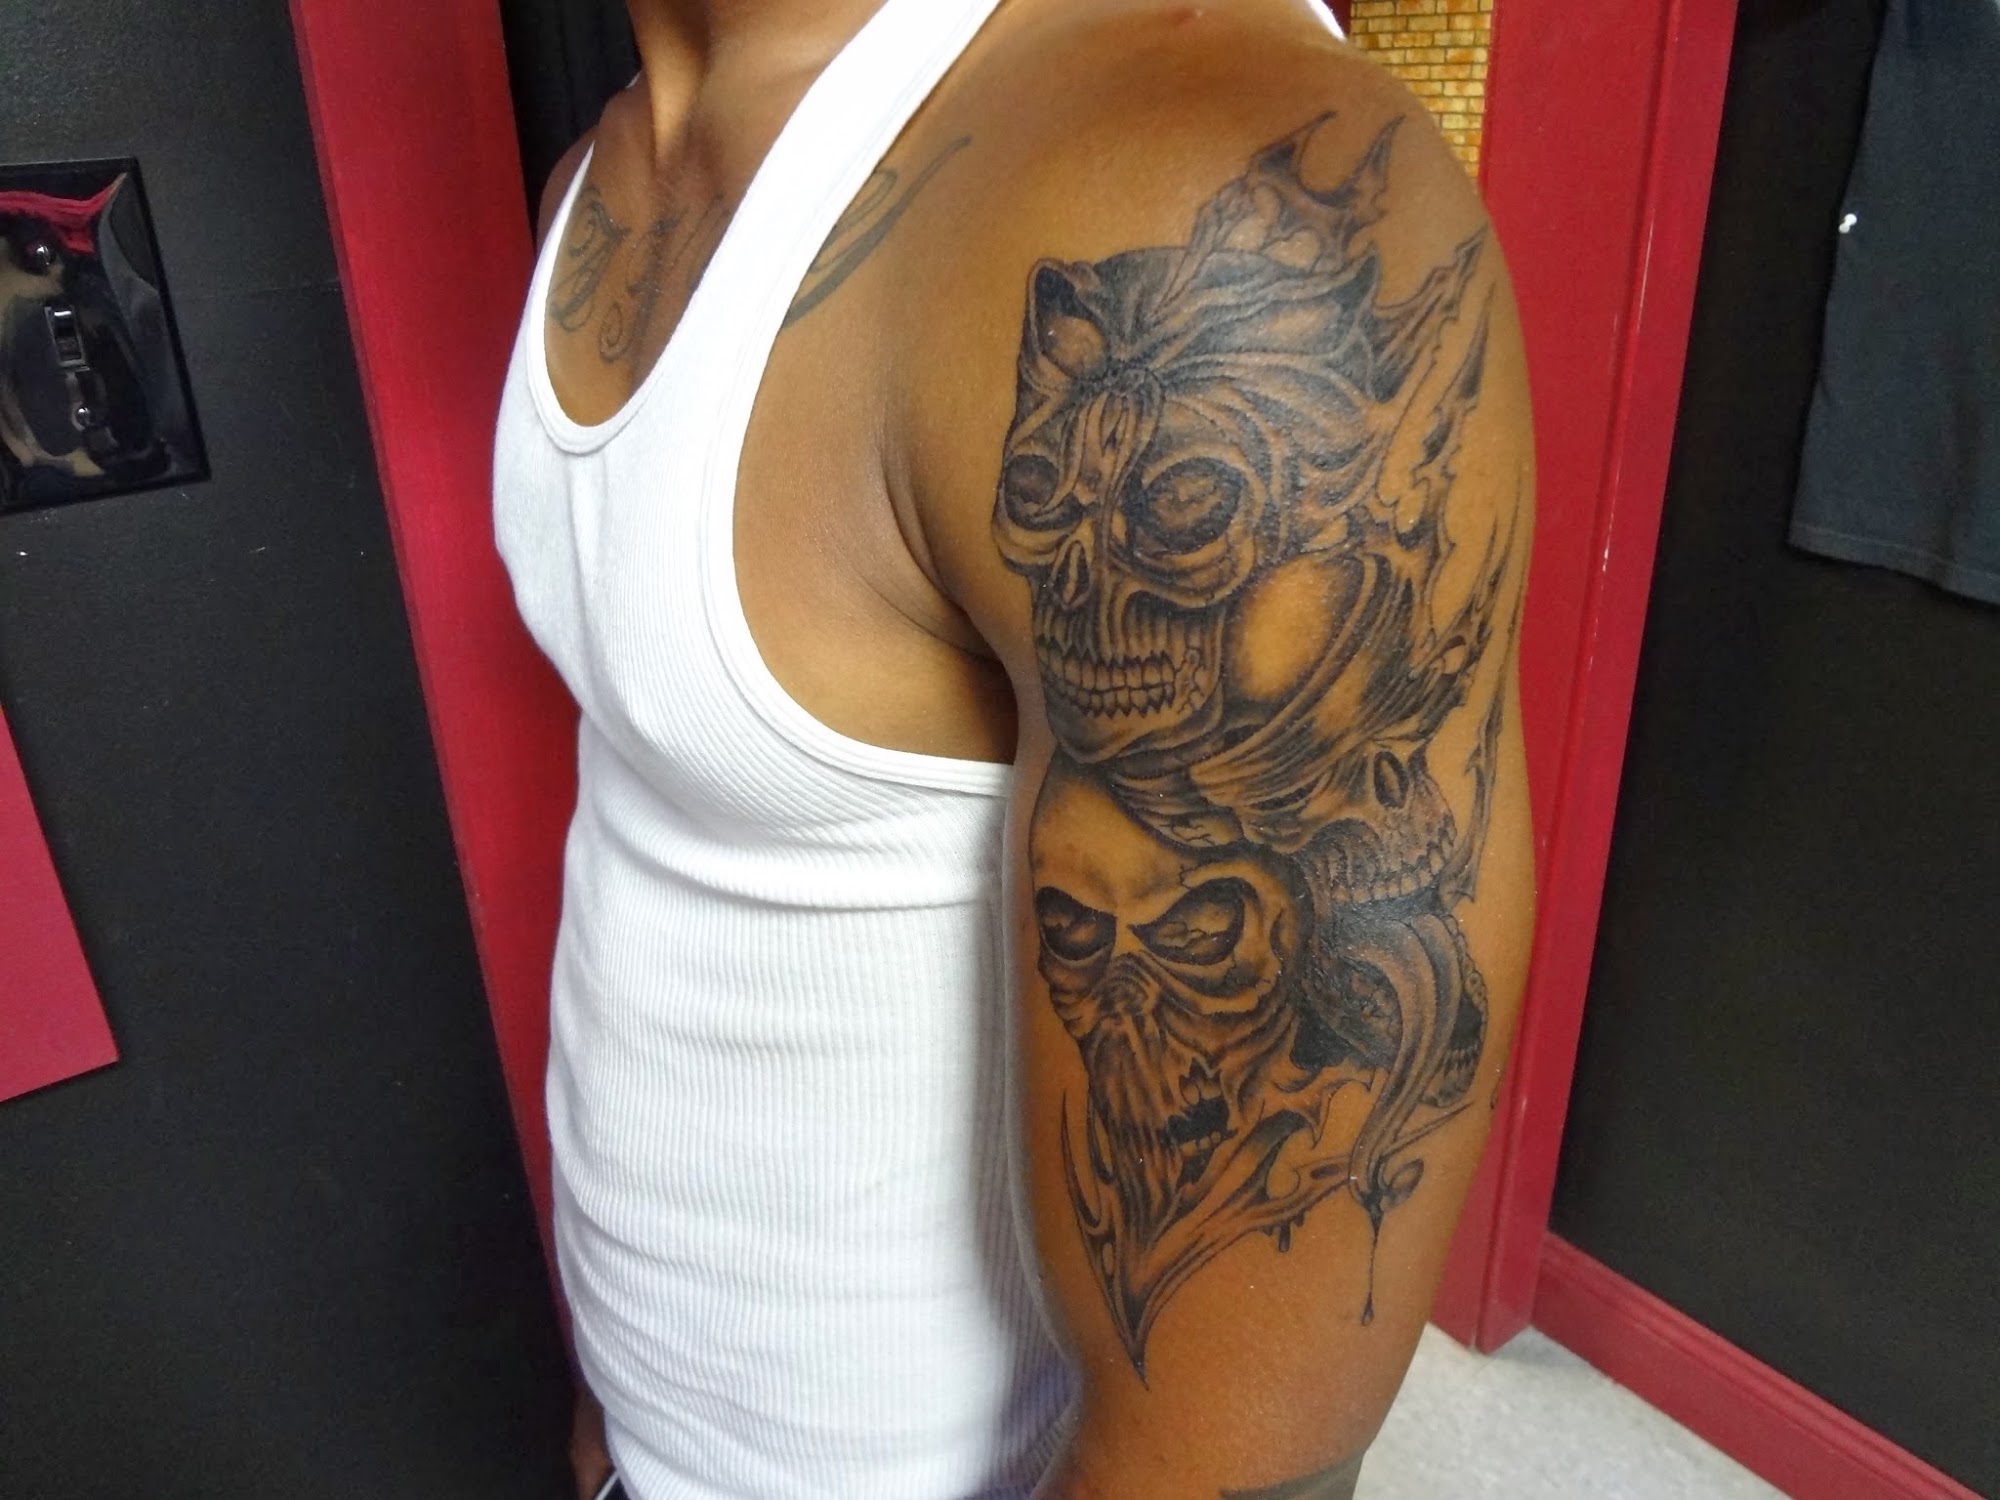 Precision Ink Tattoos 13128 US-90, Boutte Louisiana 70039